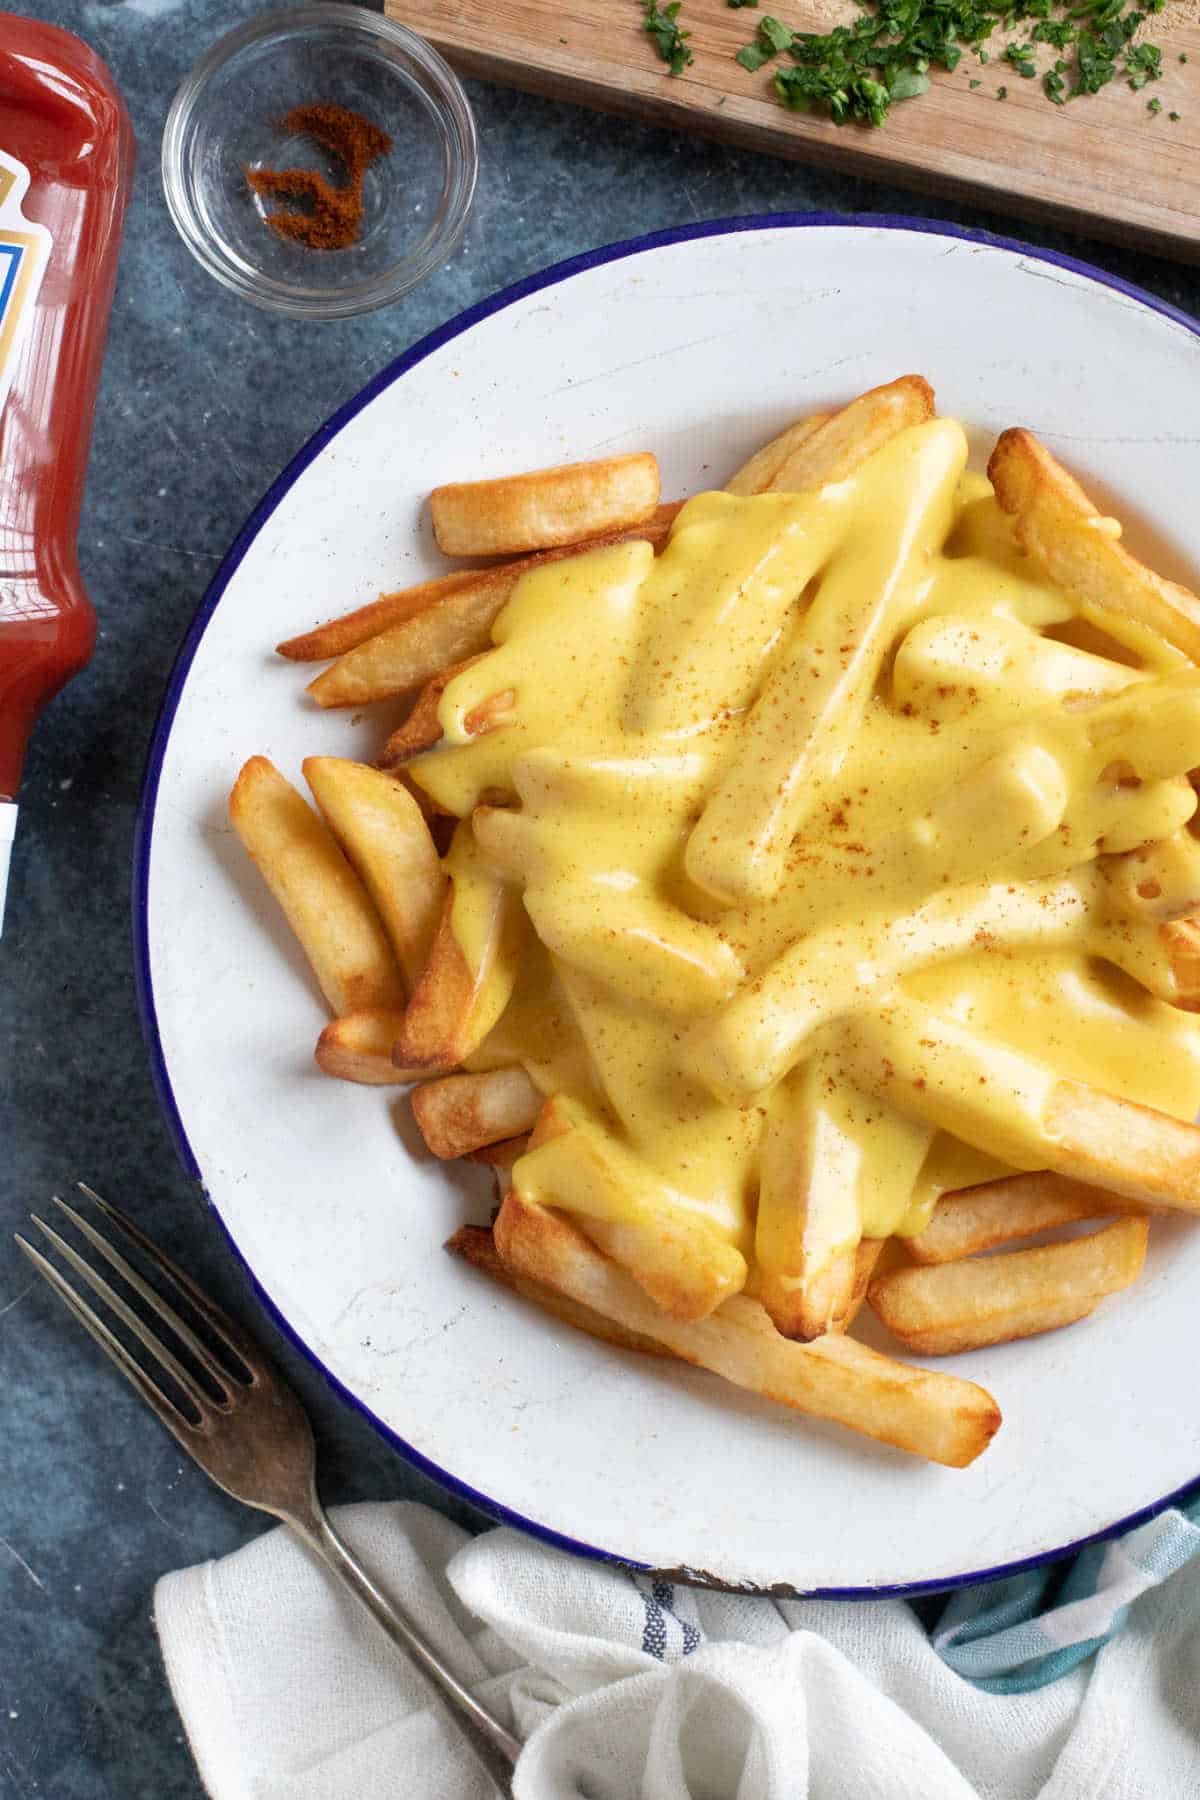 A plate of cheesy chips with ketchup.